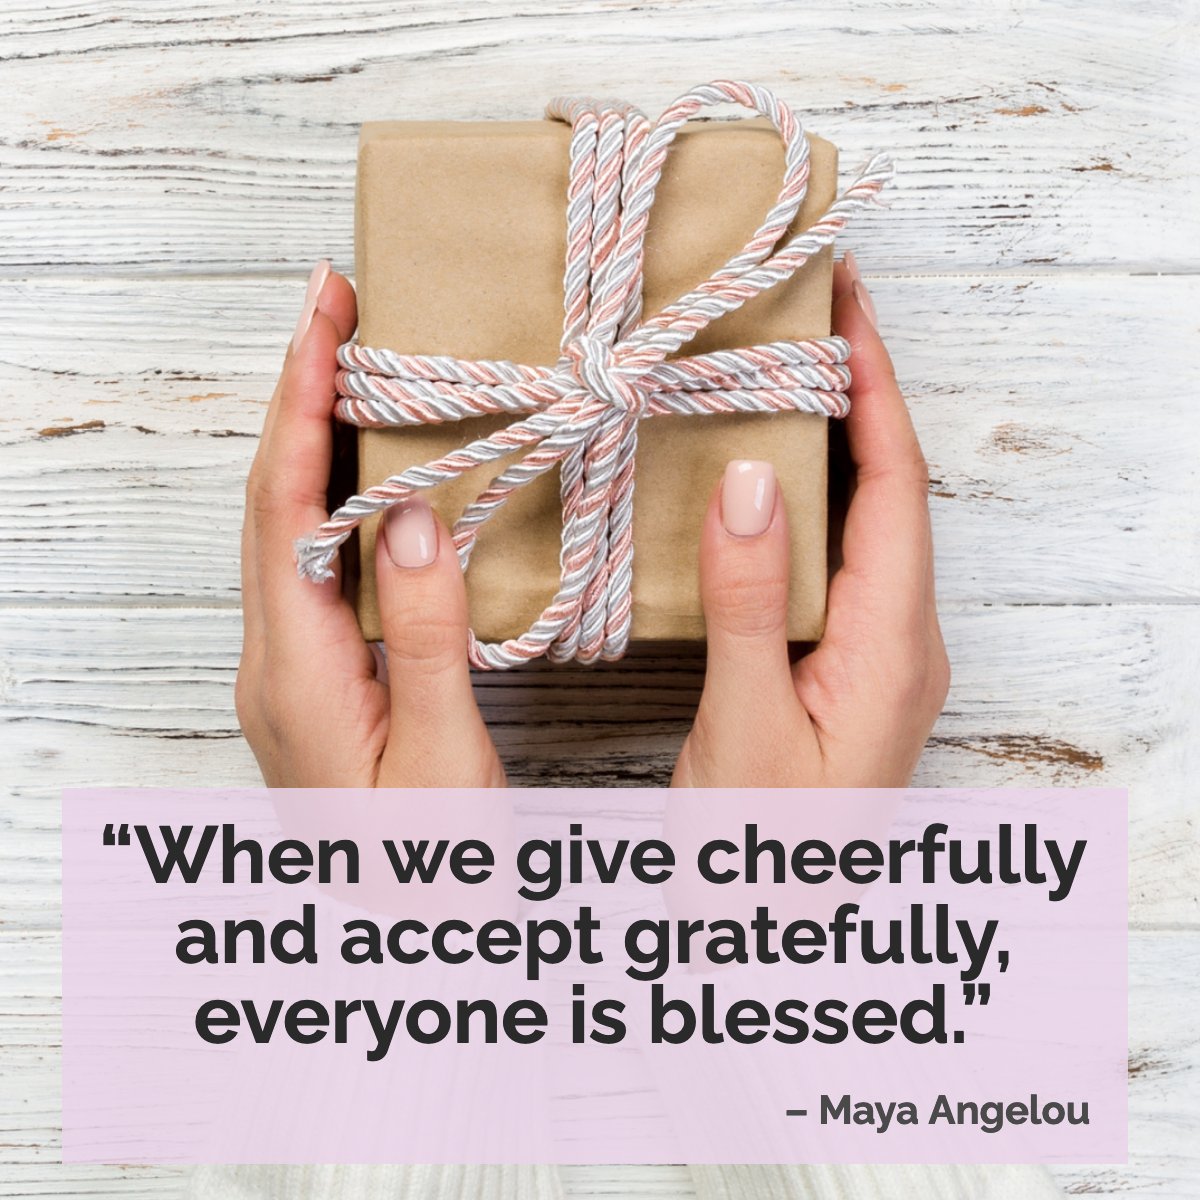 'When we give cheerfully and accept gratefully, everyone is blessed.' — Maya Angelou 🙏

 #wisdomquote #wisdomoftheday #quotegram #quoteoftheday✏️  #educationispower
 #dreamhome #homeowner #goals #homegoals #indianagoldgroup #indy #hometips #letstalk #indiana